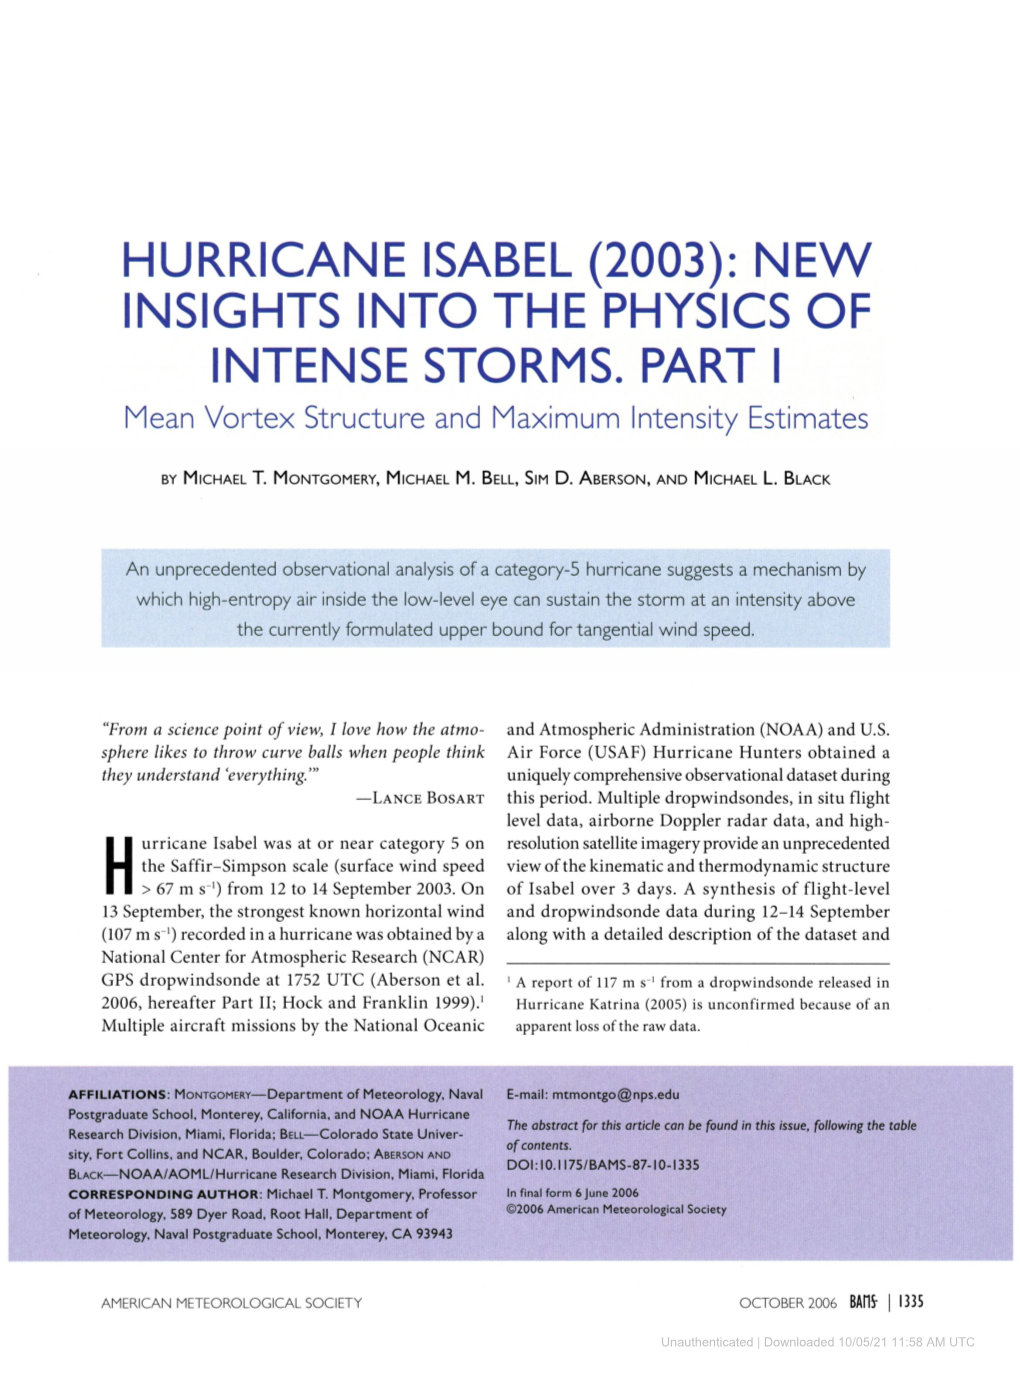 Hurricane Isabel (2003): New Insights Into the Physics of Intense Storms